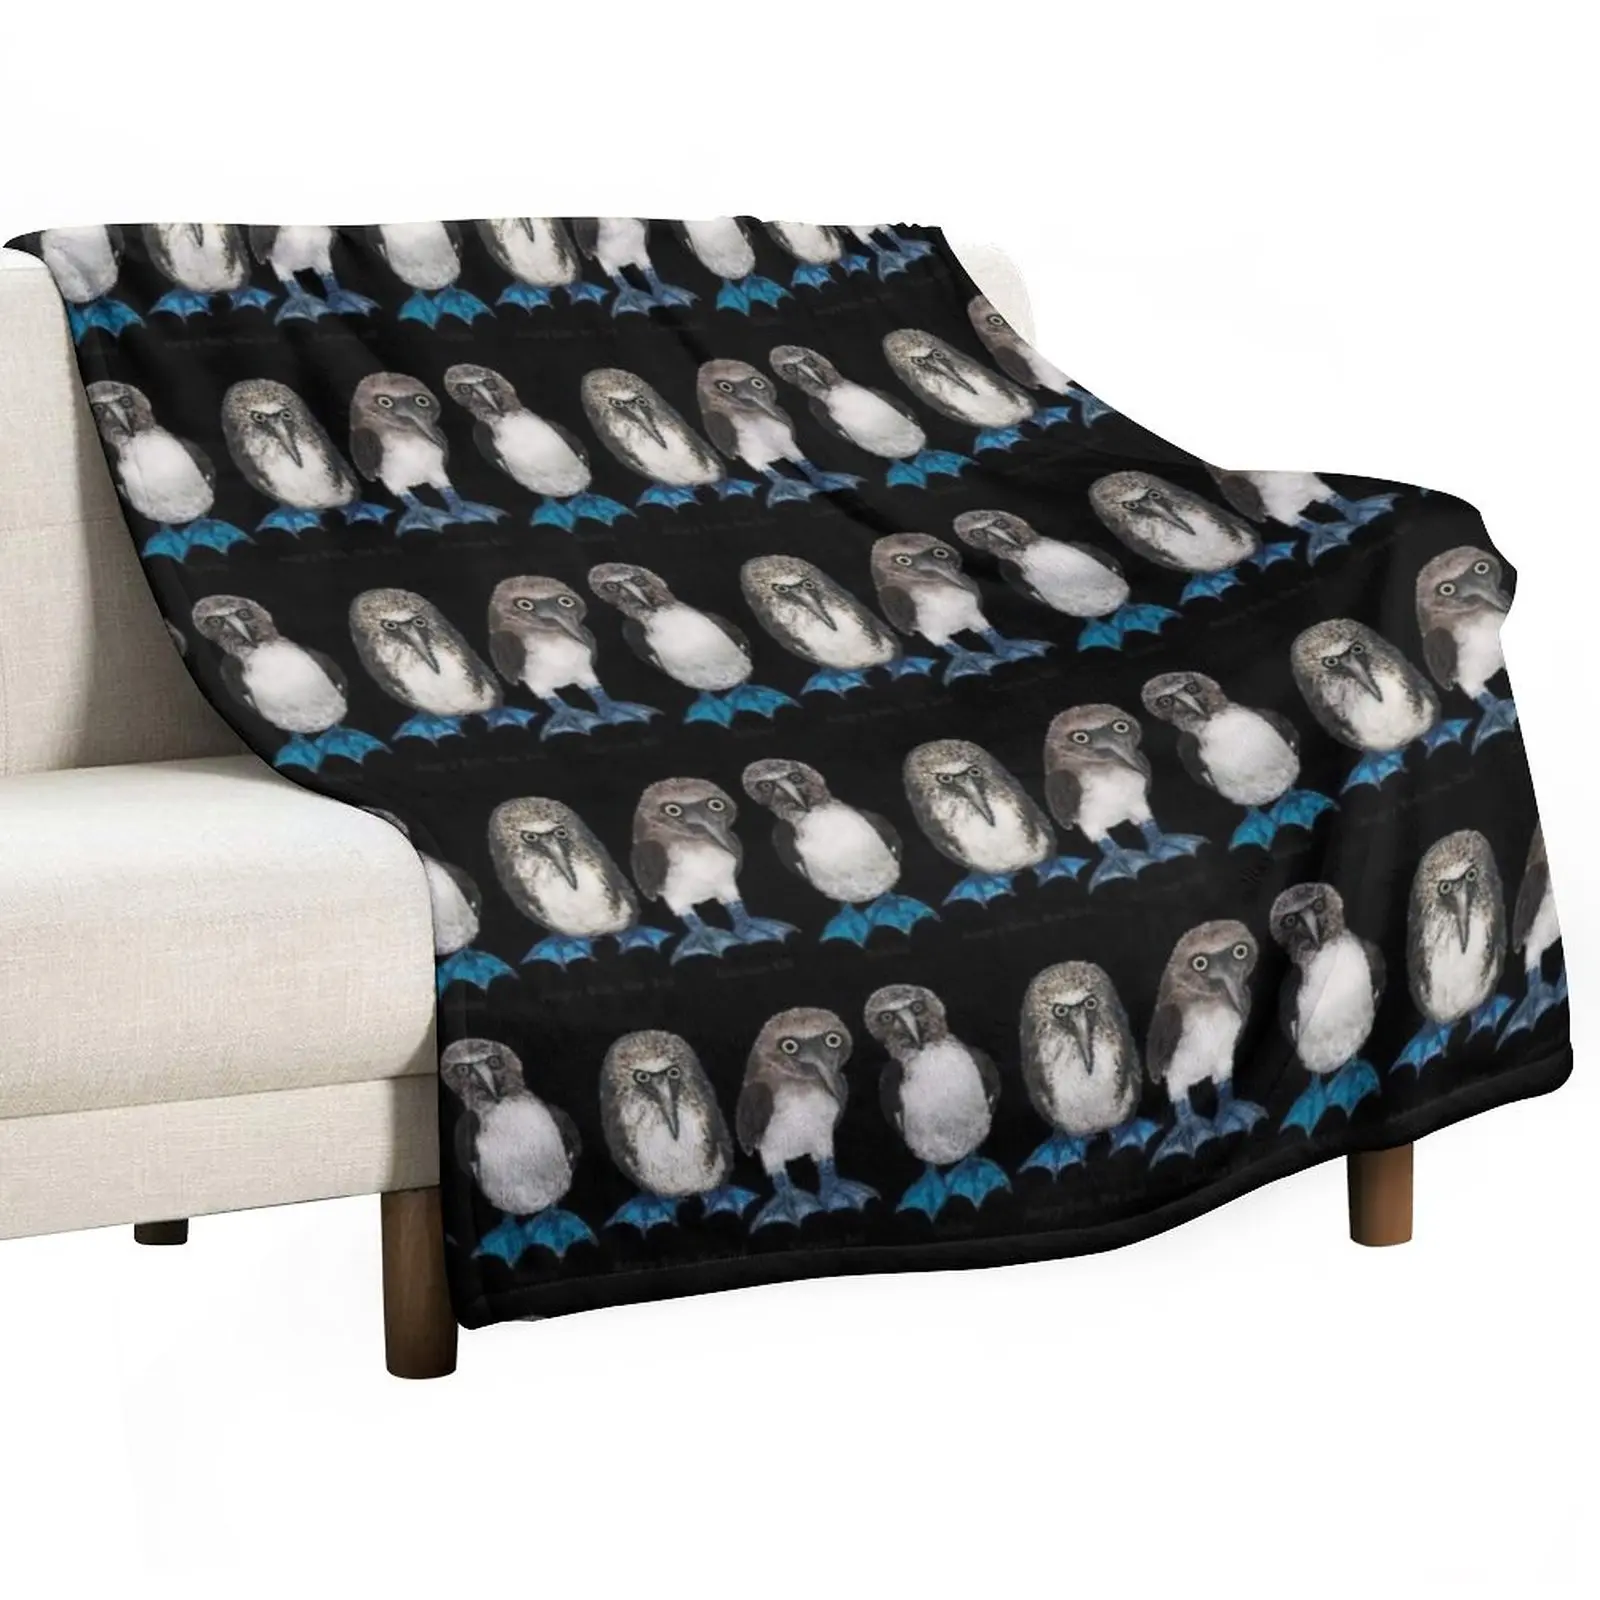 

Bobby, Angry Bob the 3rd and Curious Bill the trio of Blue Footed Boobies on Blue Throw Blanket Hairy Decorative Throw Blankets